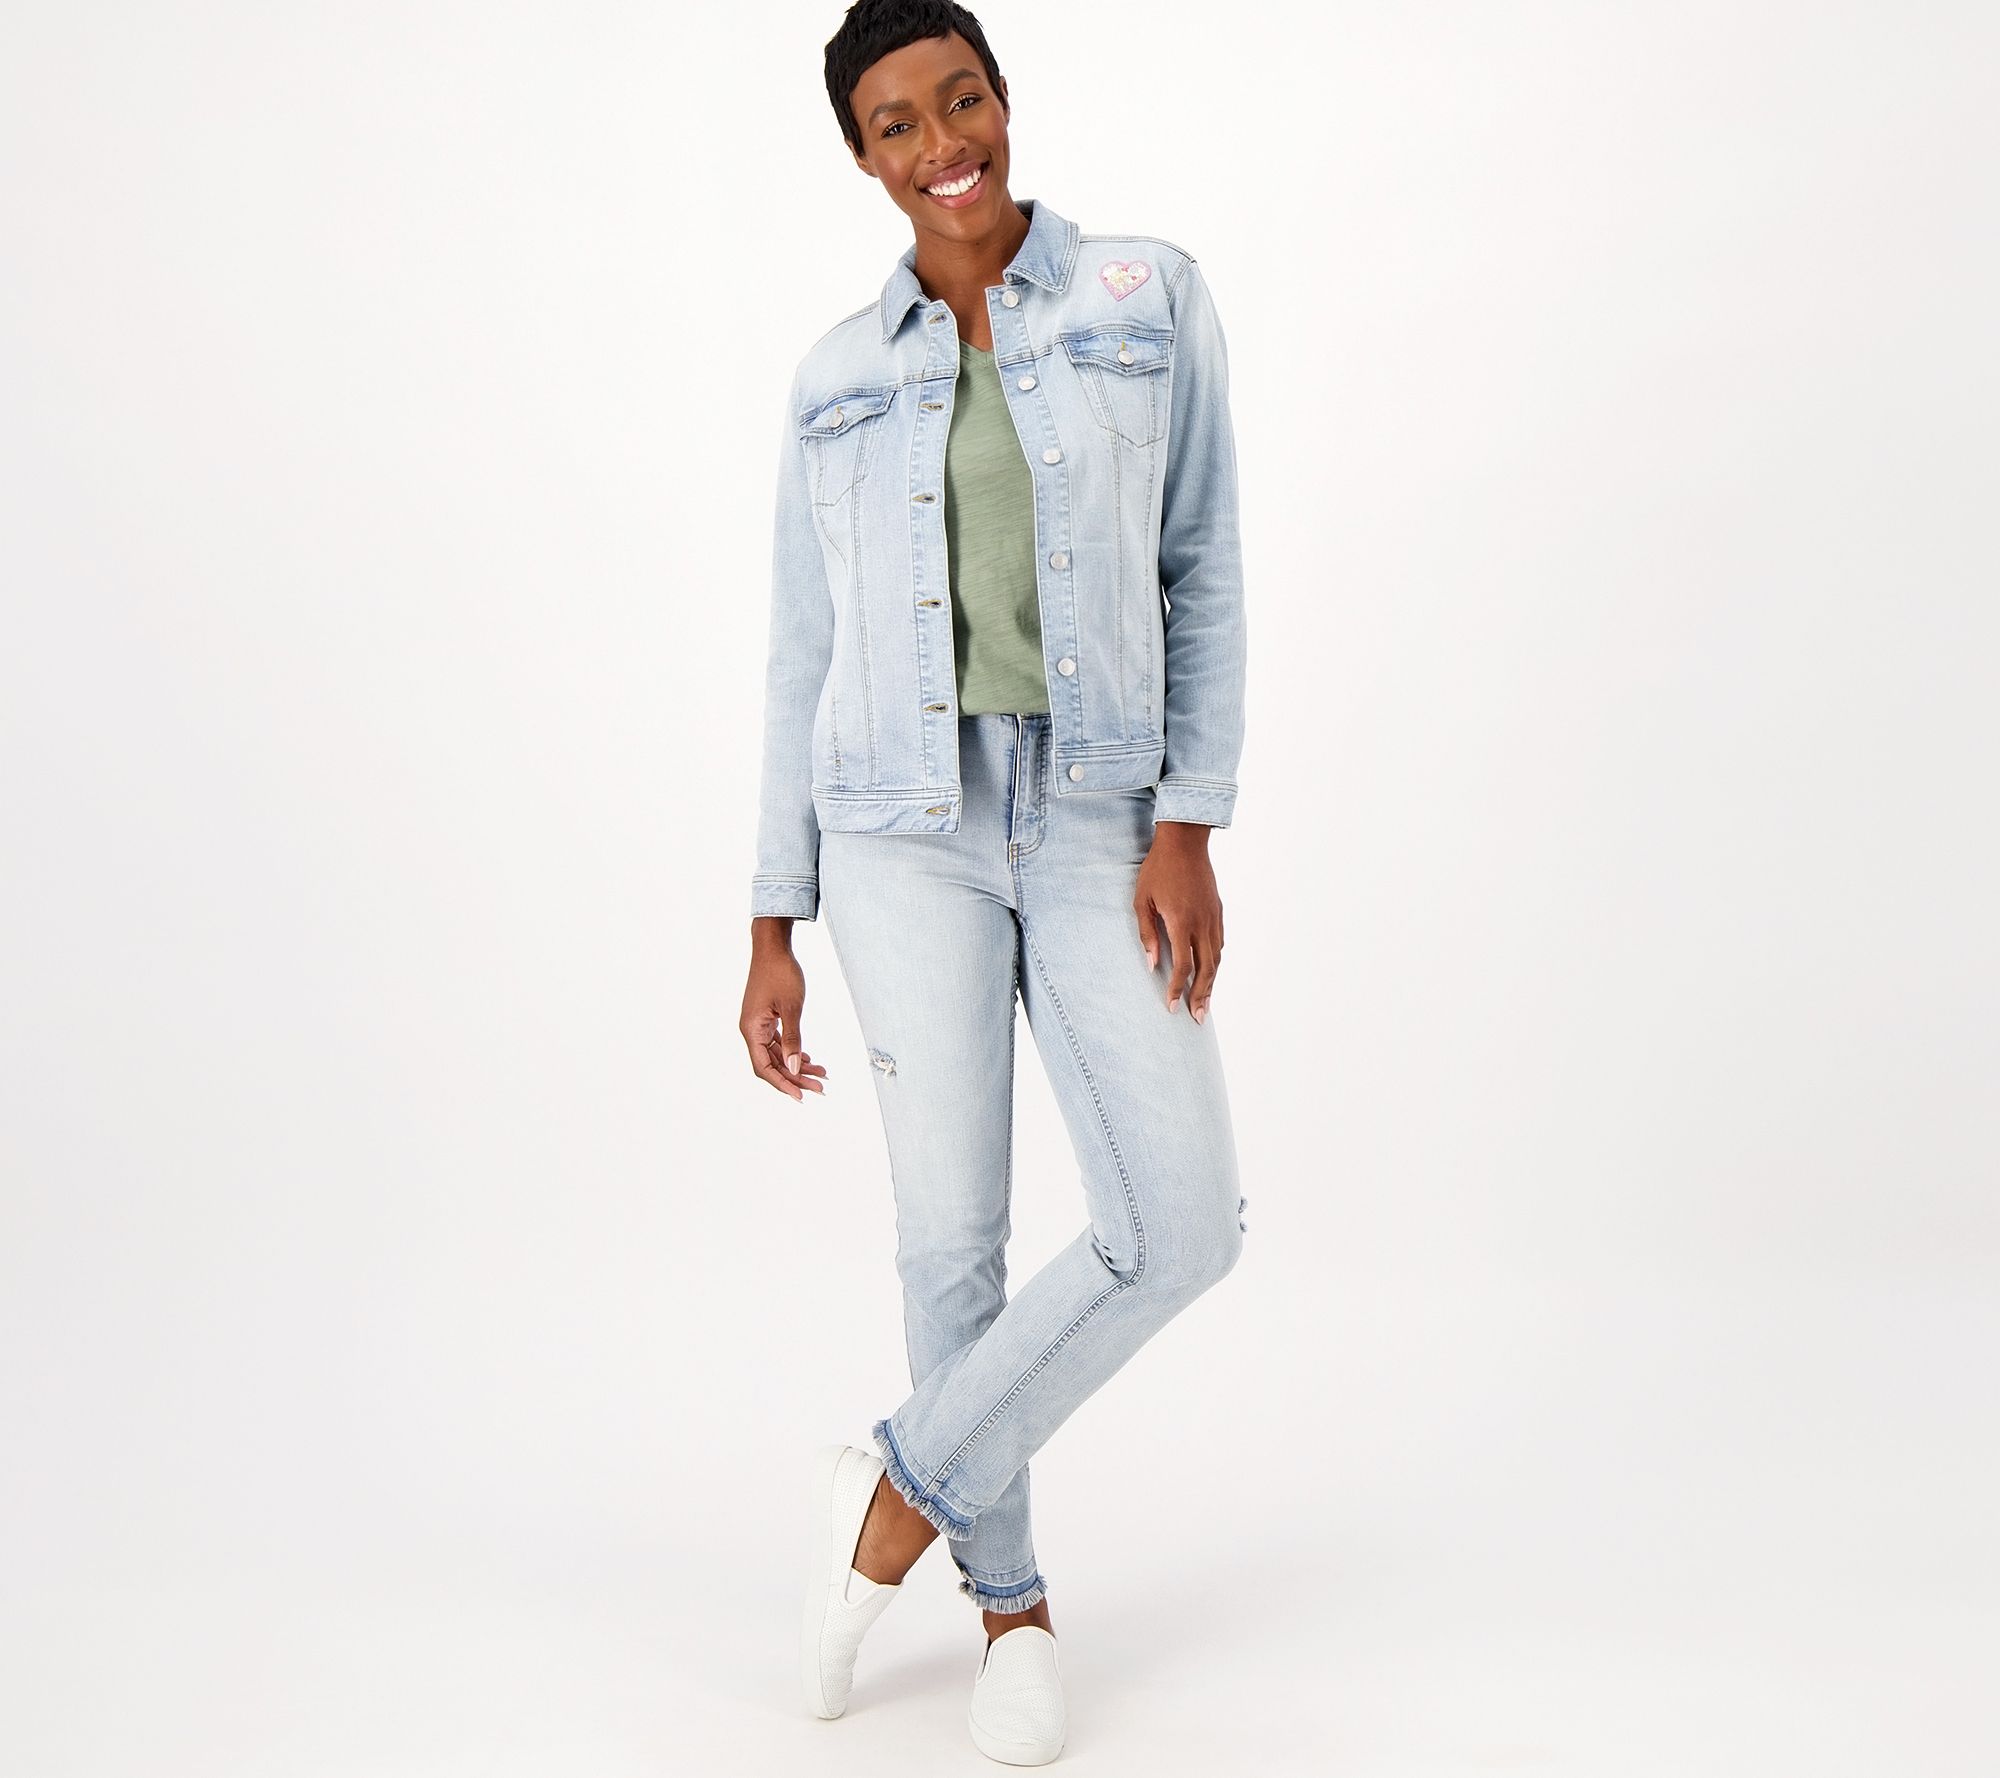 Candace Cameron Bure Pacific Denim Relaxed Jean Jacket